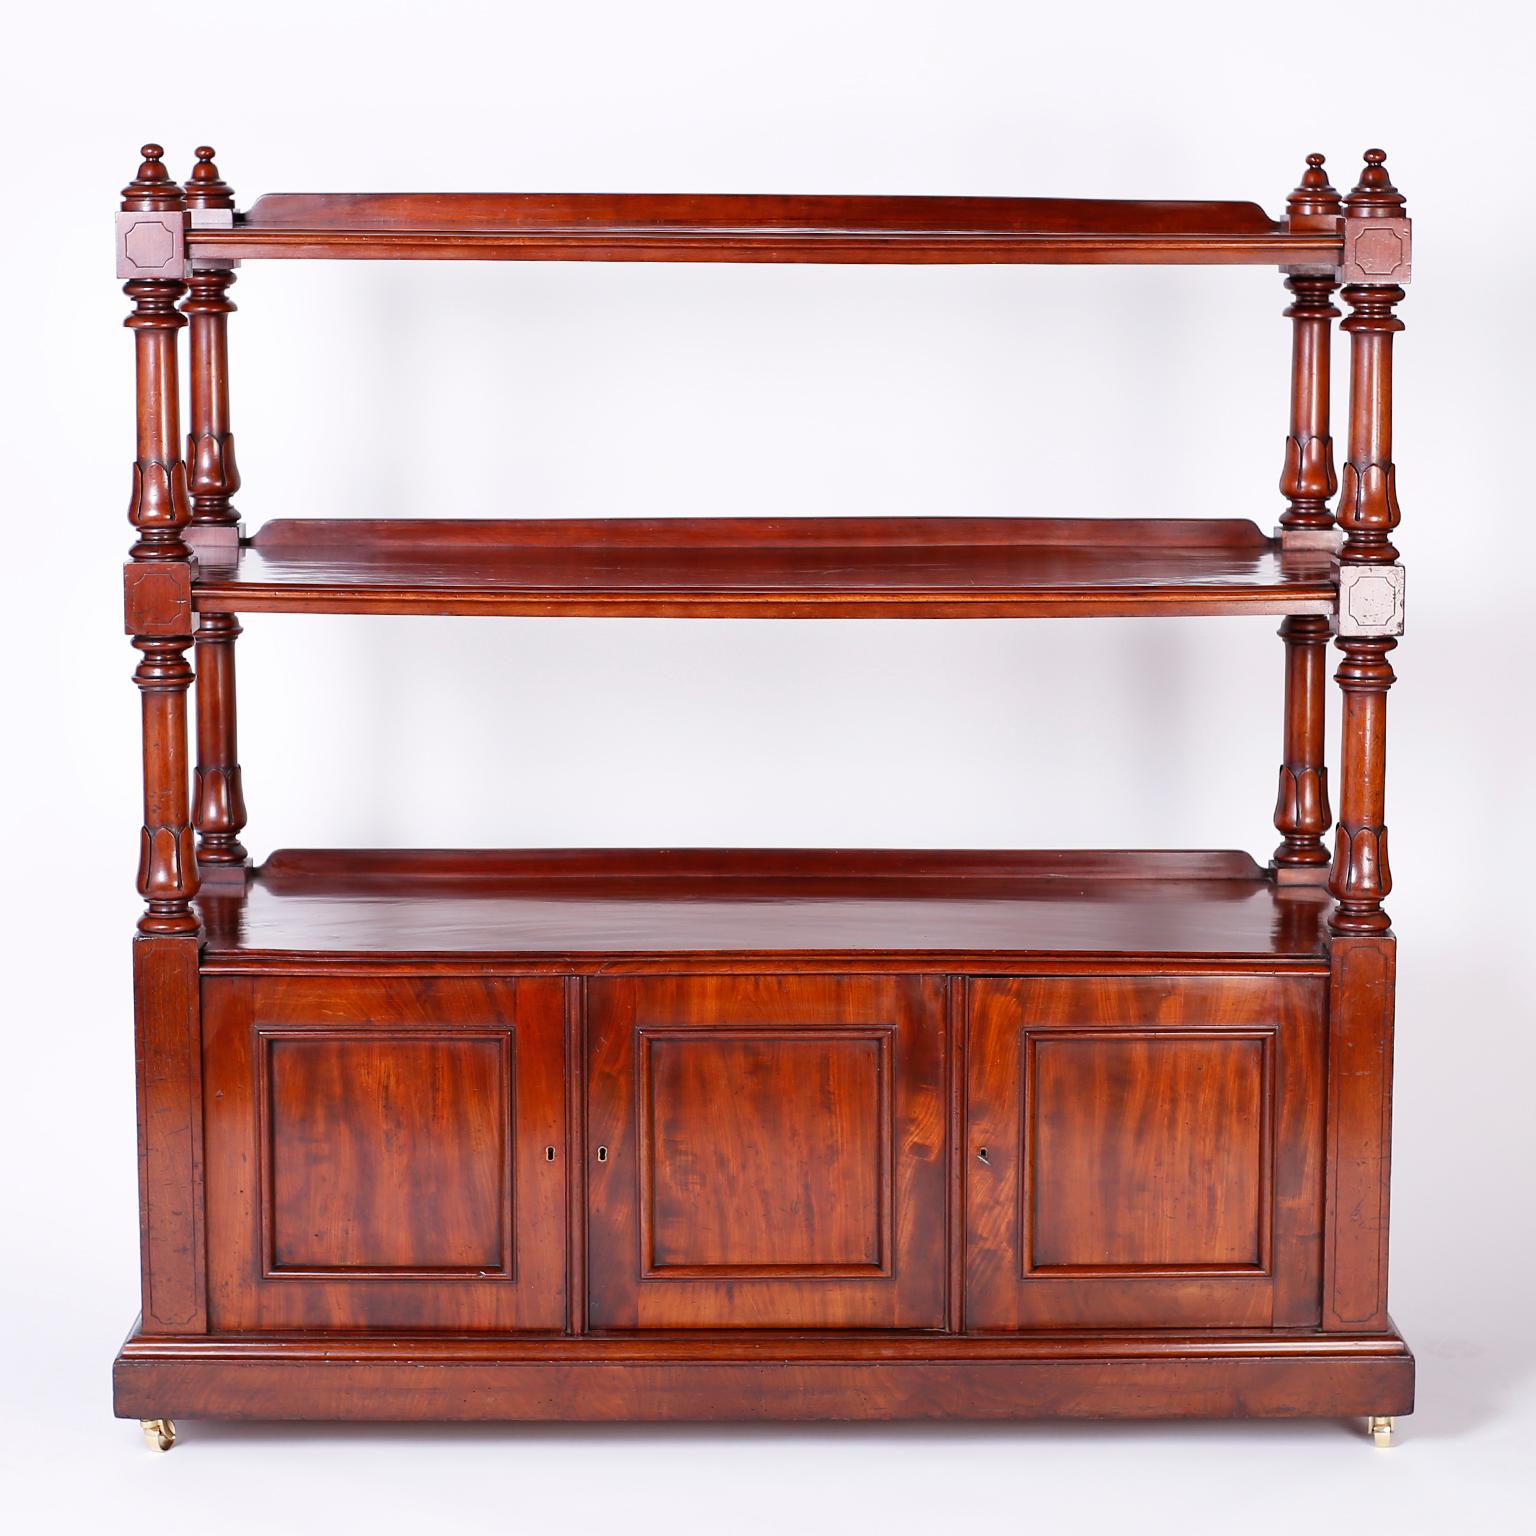 William IV English étagère or server, hand crafted in well grained mahogany having two shelves with turned and carved supports with a lower cabinet featuring a zinc lined wine cellarette over a block foot lifted by brass casters.